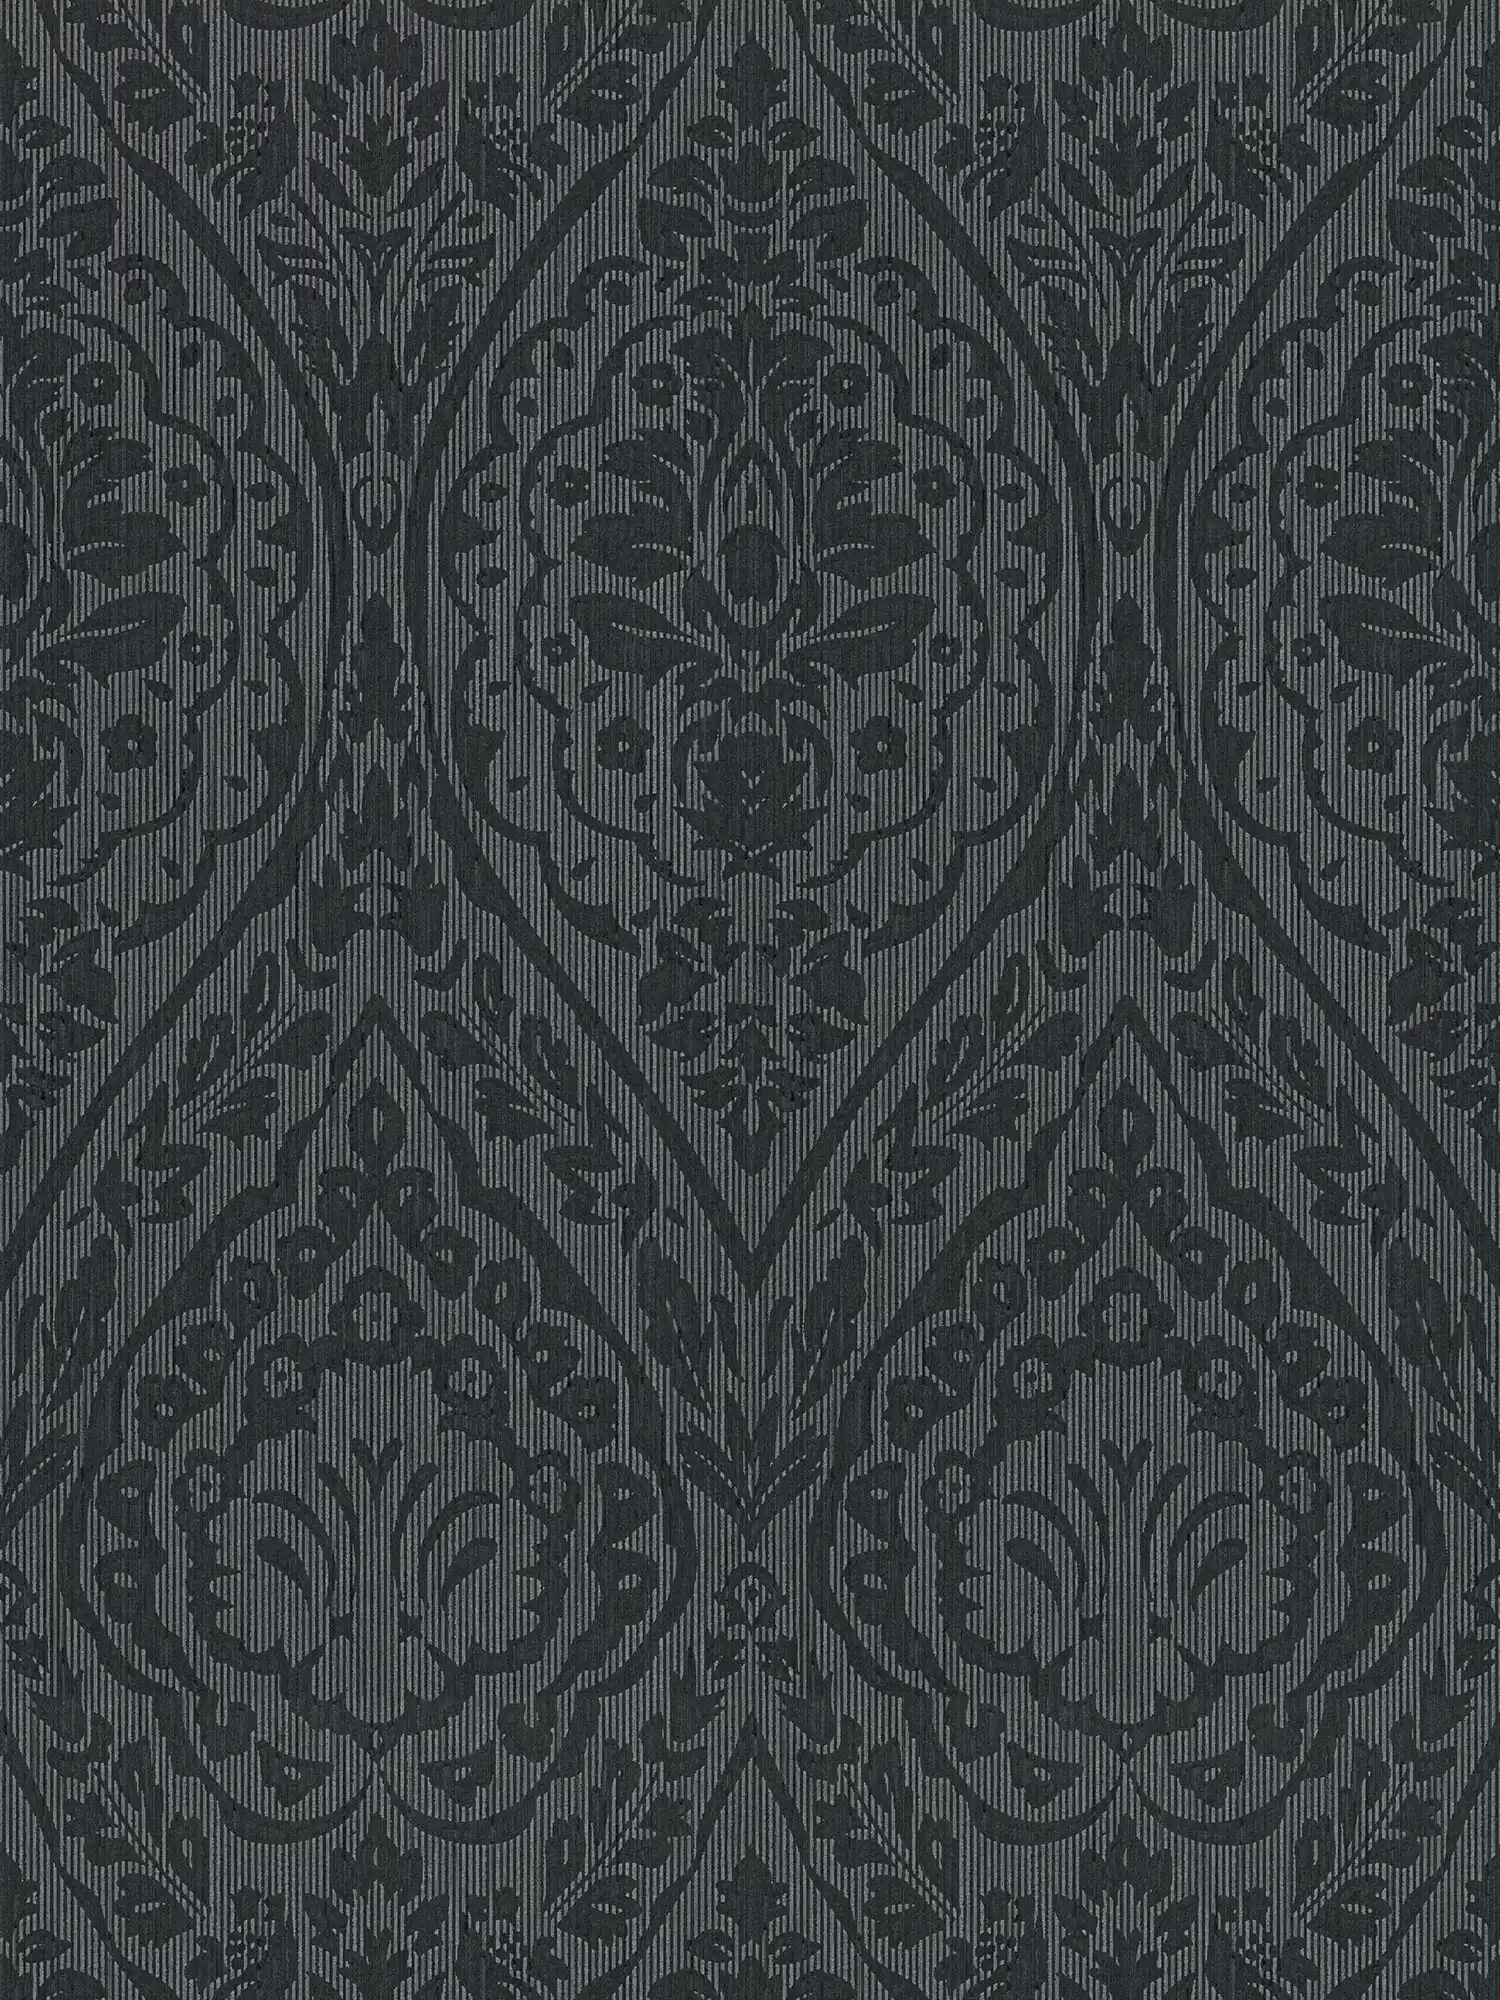 Floral ornament wallpaper in colonial style - grey, black
